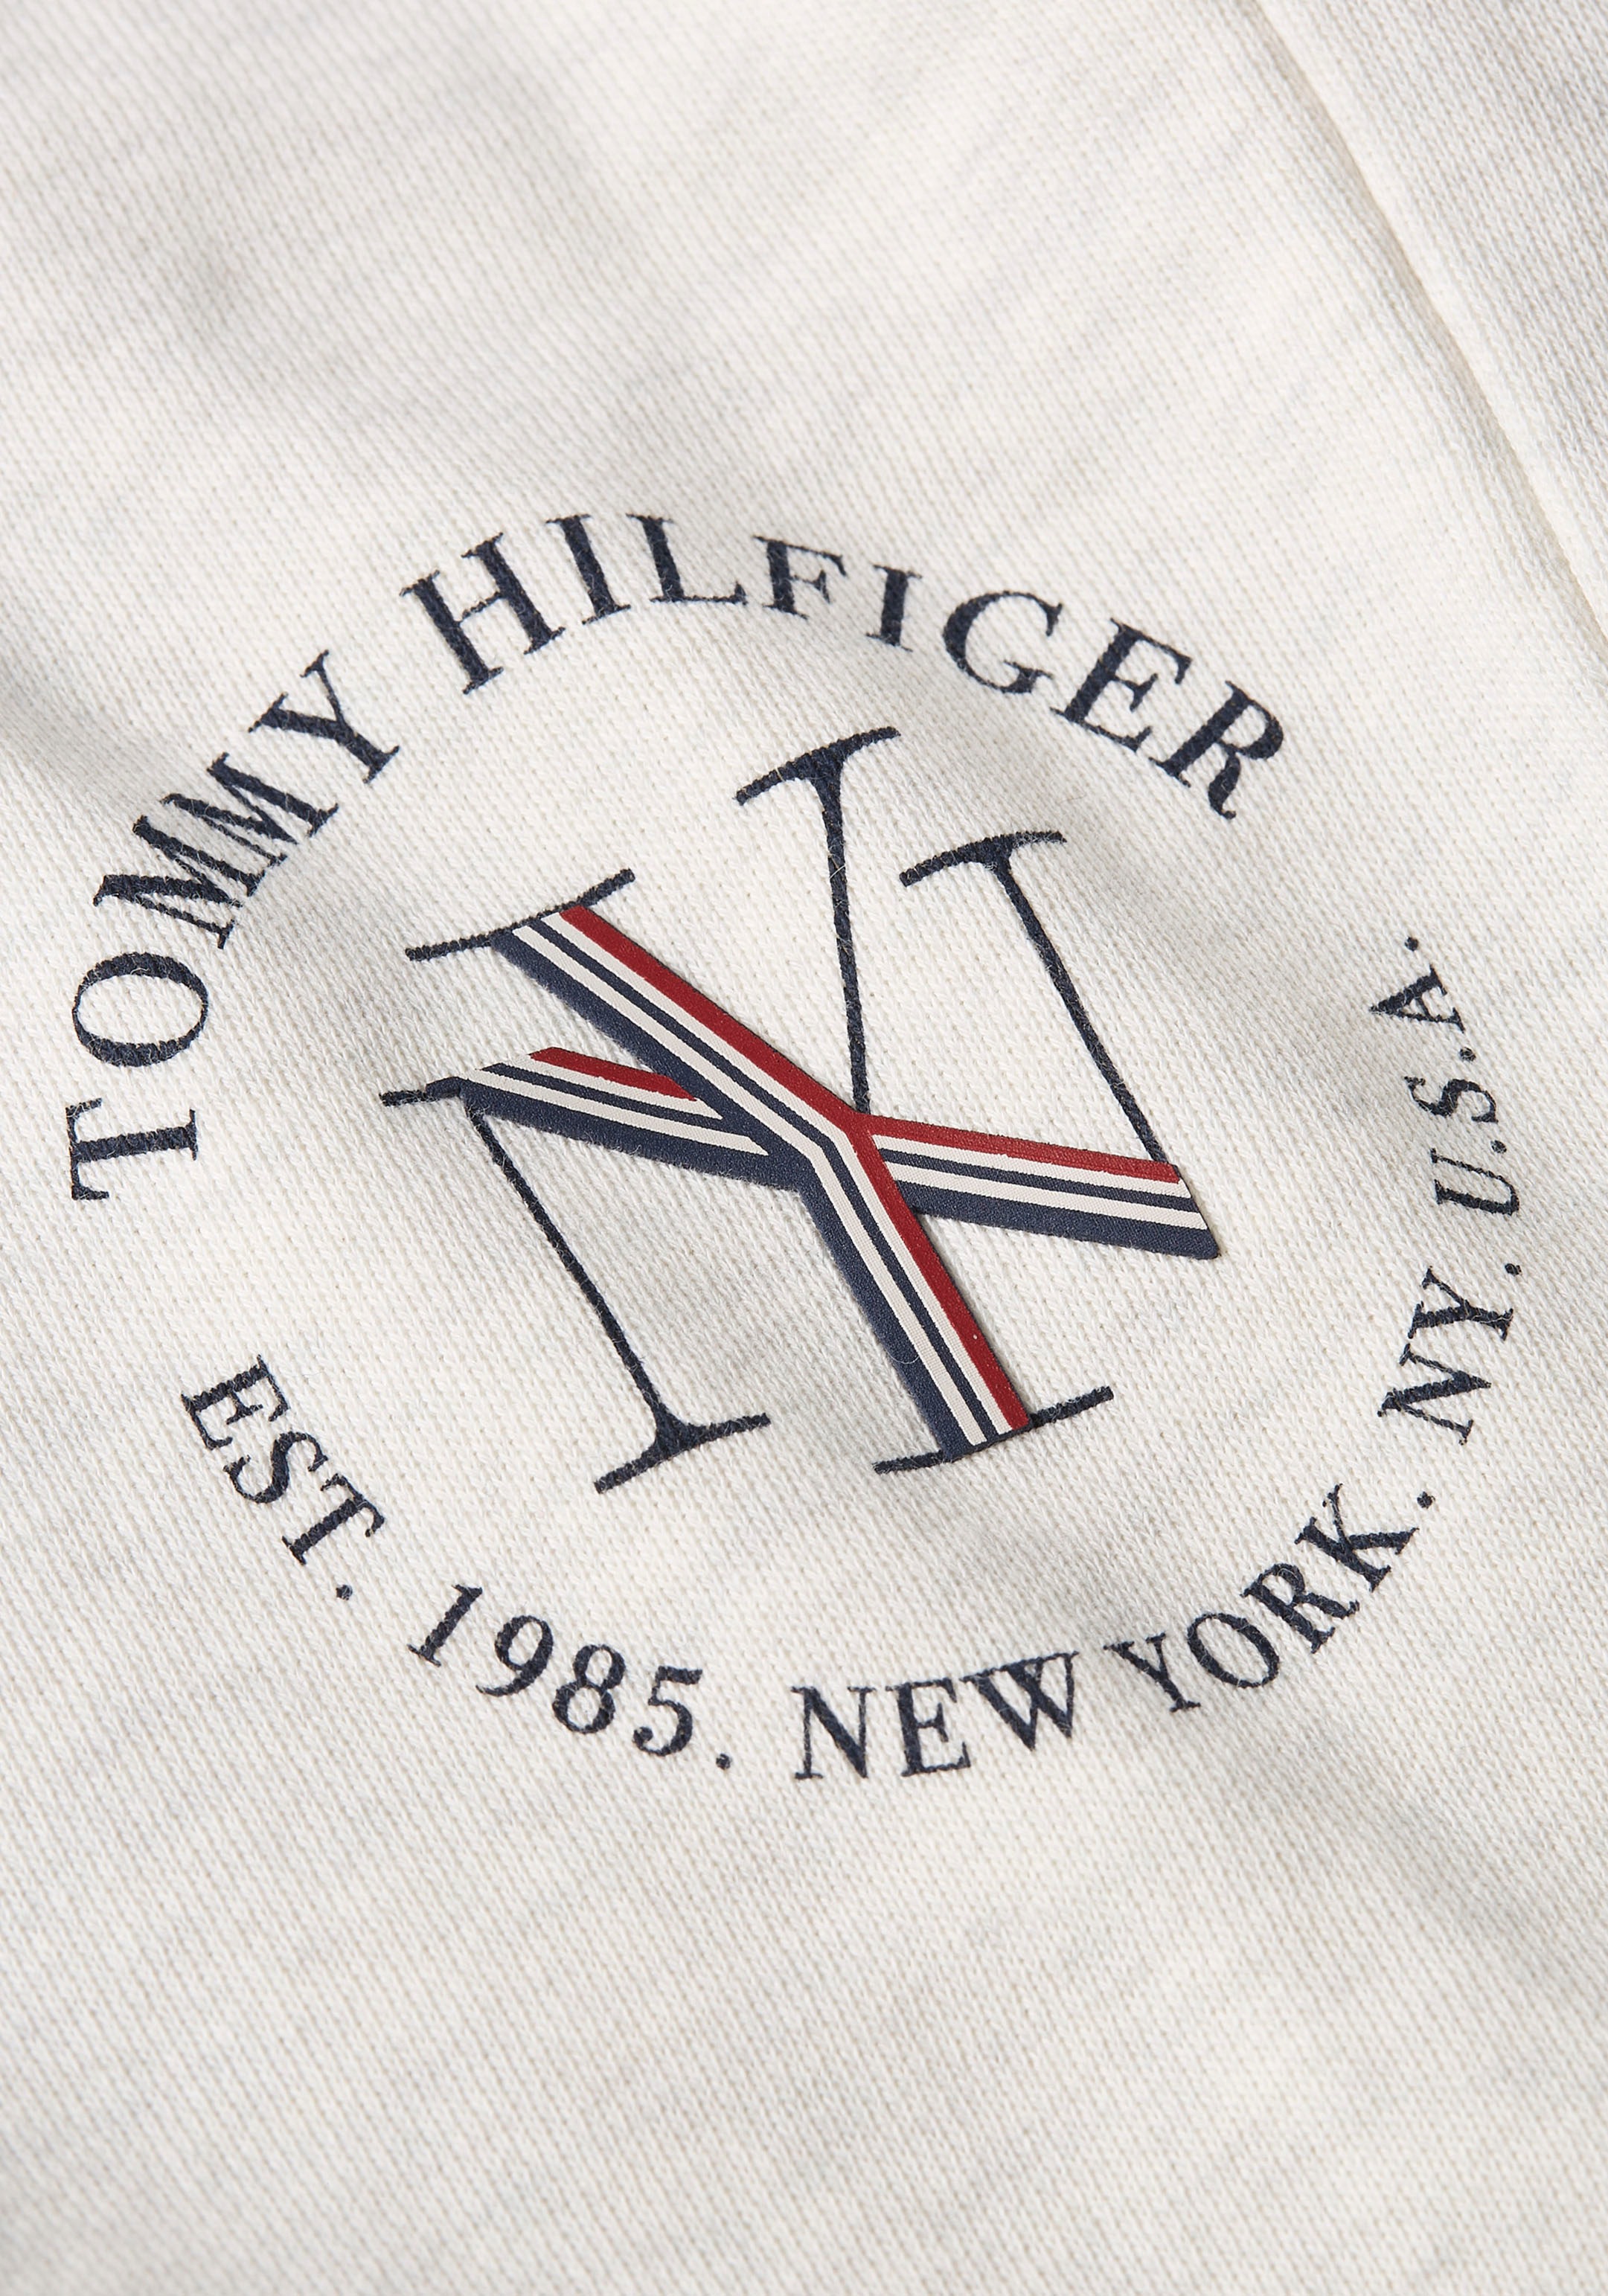 Tommy Hilfiger Hilfiger ROUNDALL SWEATPANTS«, Markenlabel mit Tommy NYC ♕ Sweatpants »TAPERED bei